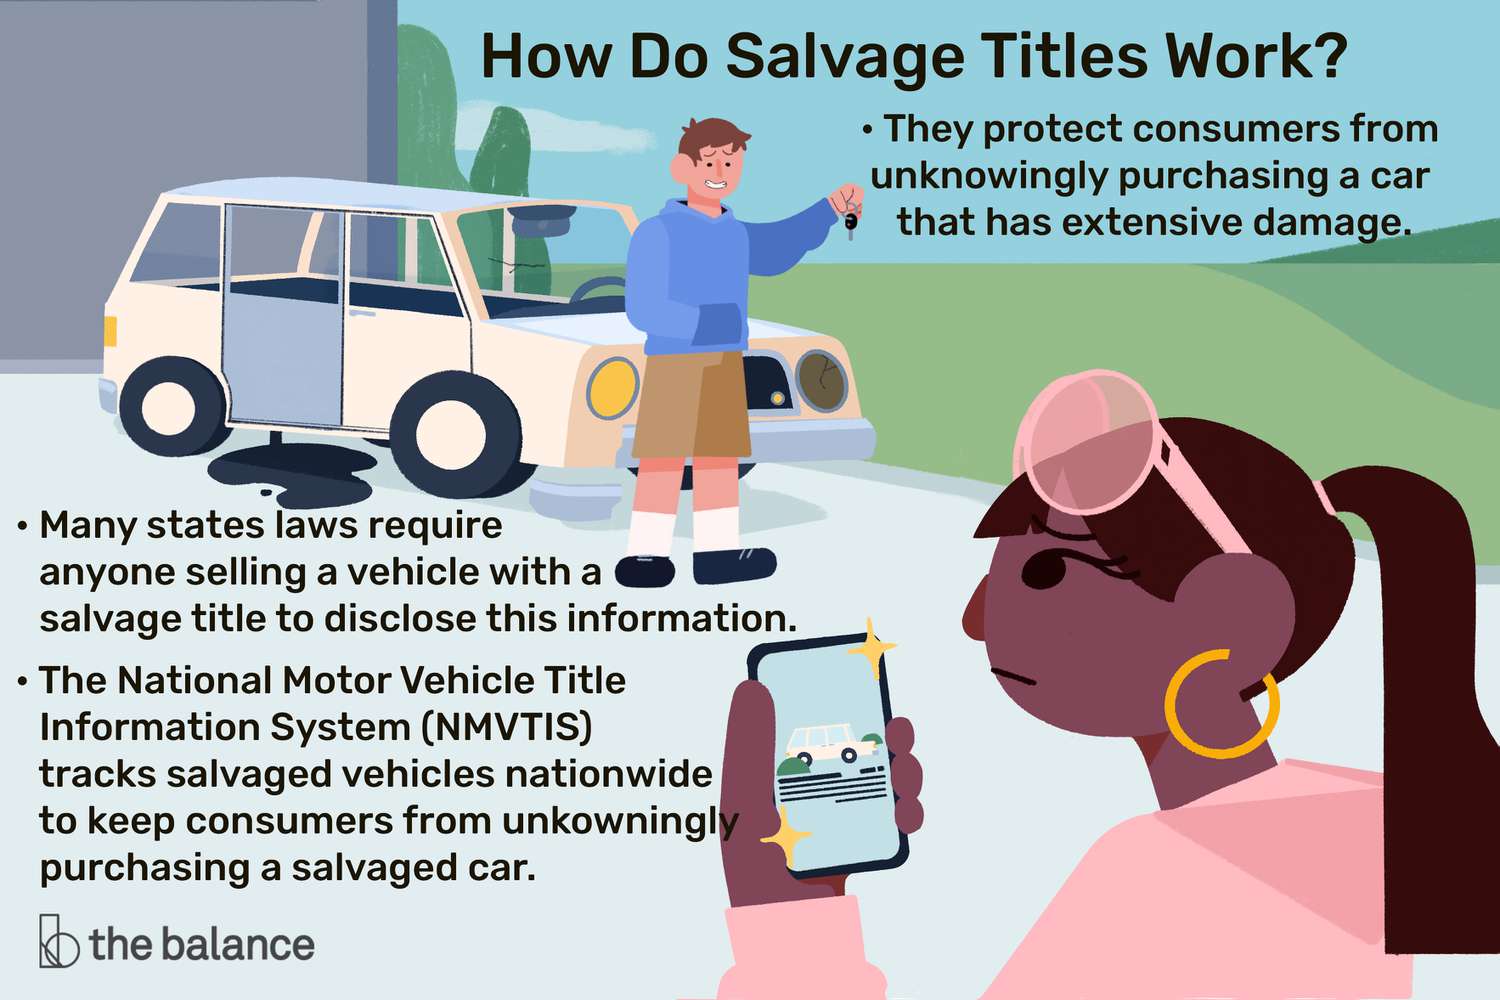 If a Car is Stolen Does It Get a Salvage Title